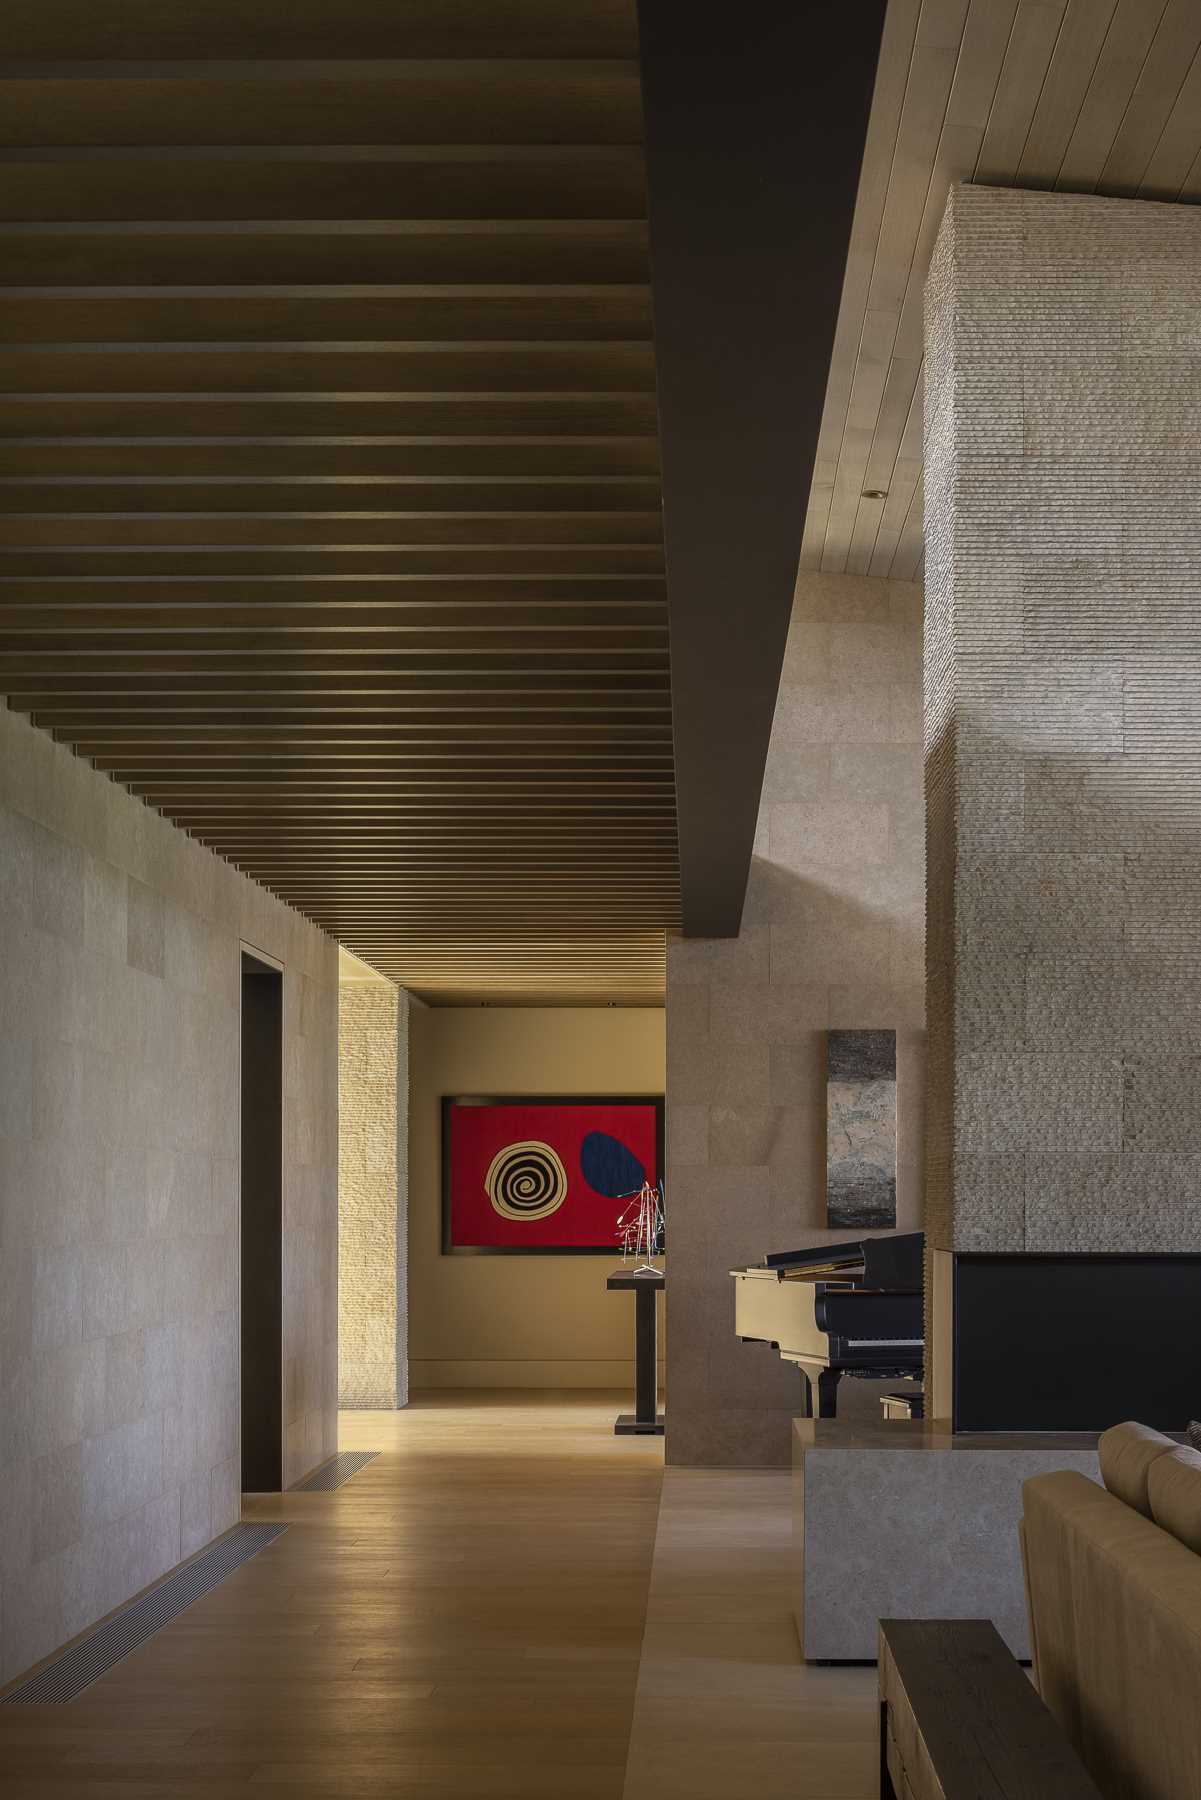 In this modern house, the texture of the limestone varies and defines the different zones within the home, while flooring transitions from tile to wood.